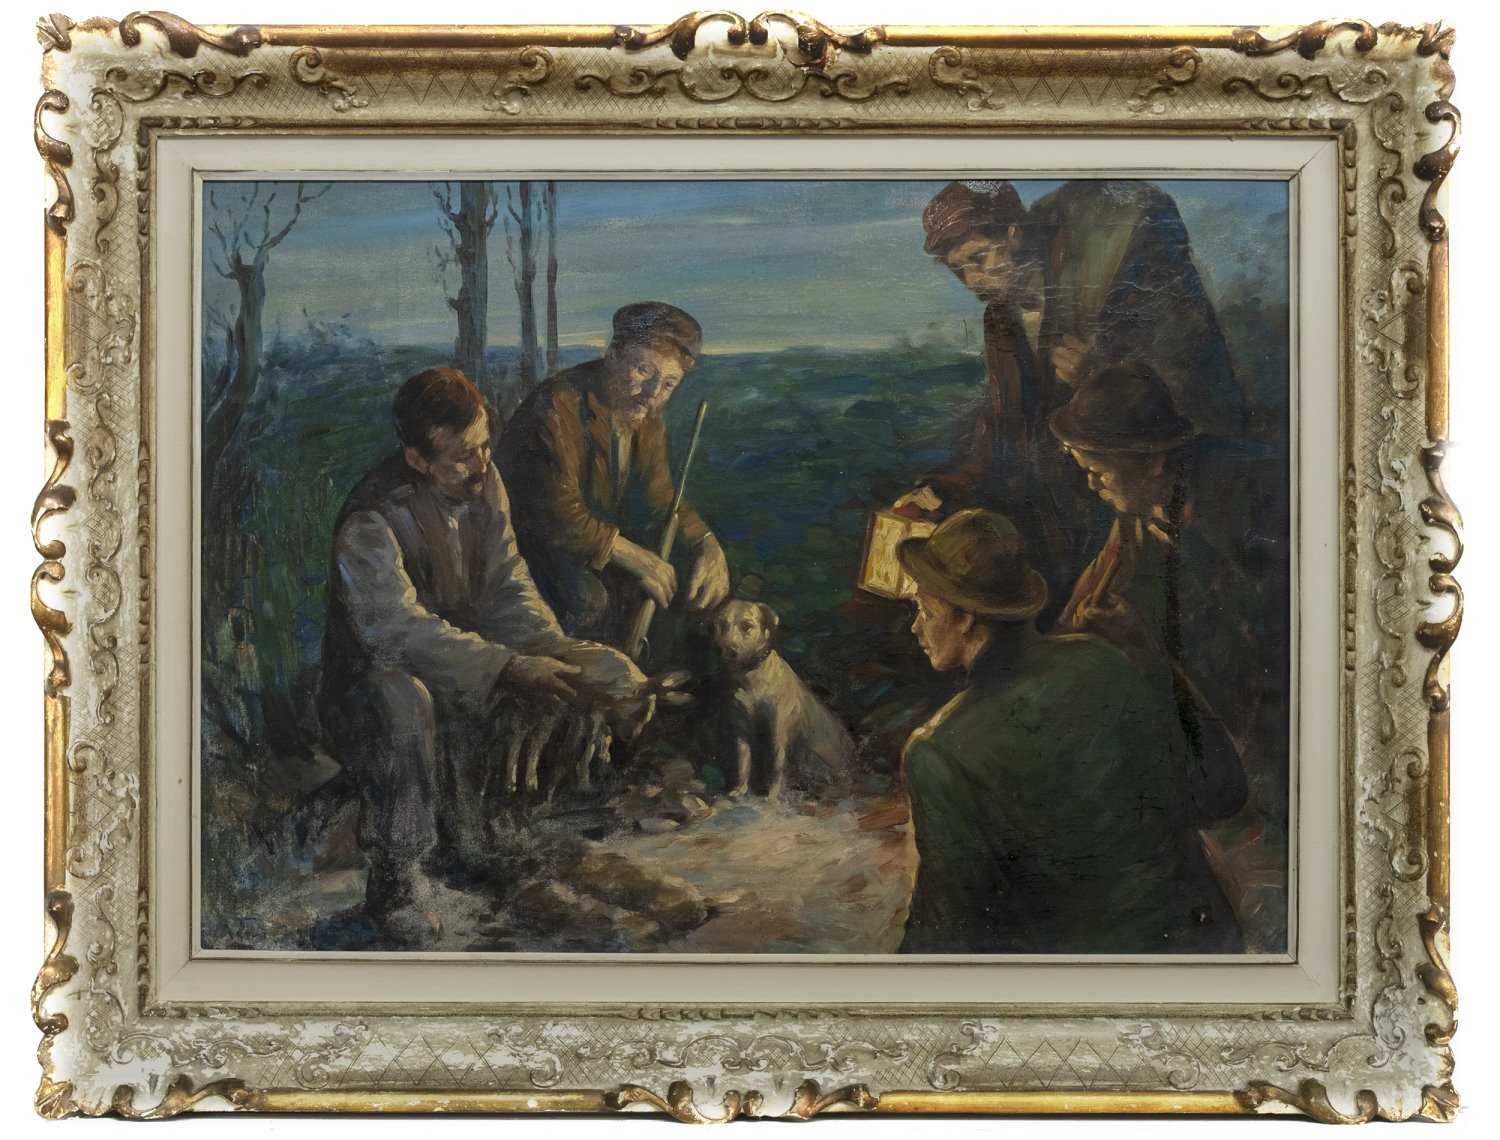 Lot 46 - FIGURES AND ANIMAL BY LAMP LIGHT, AN OIL